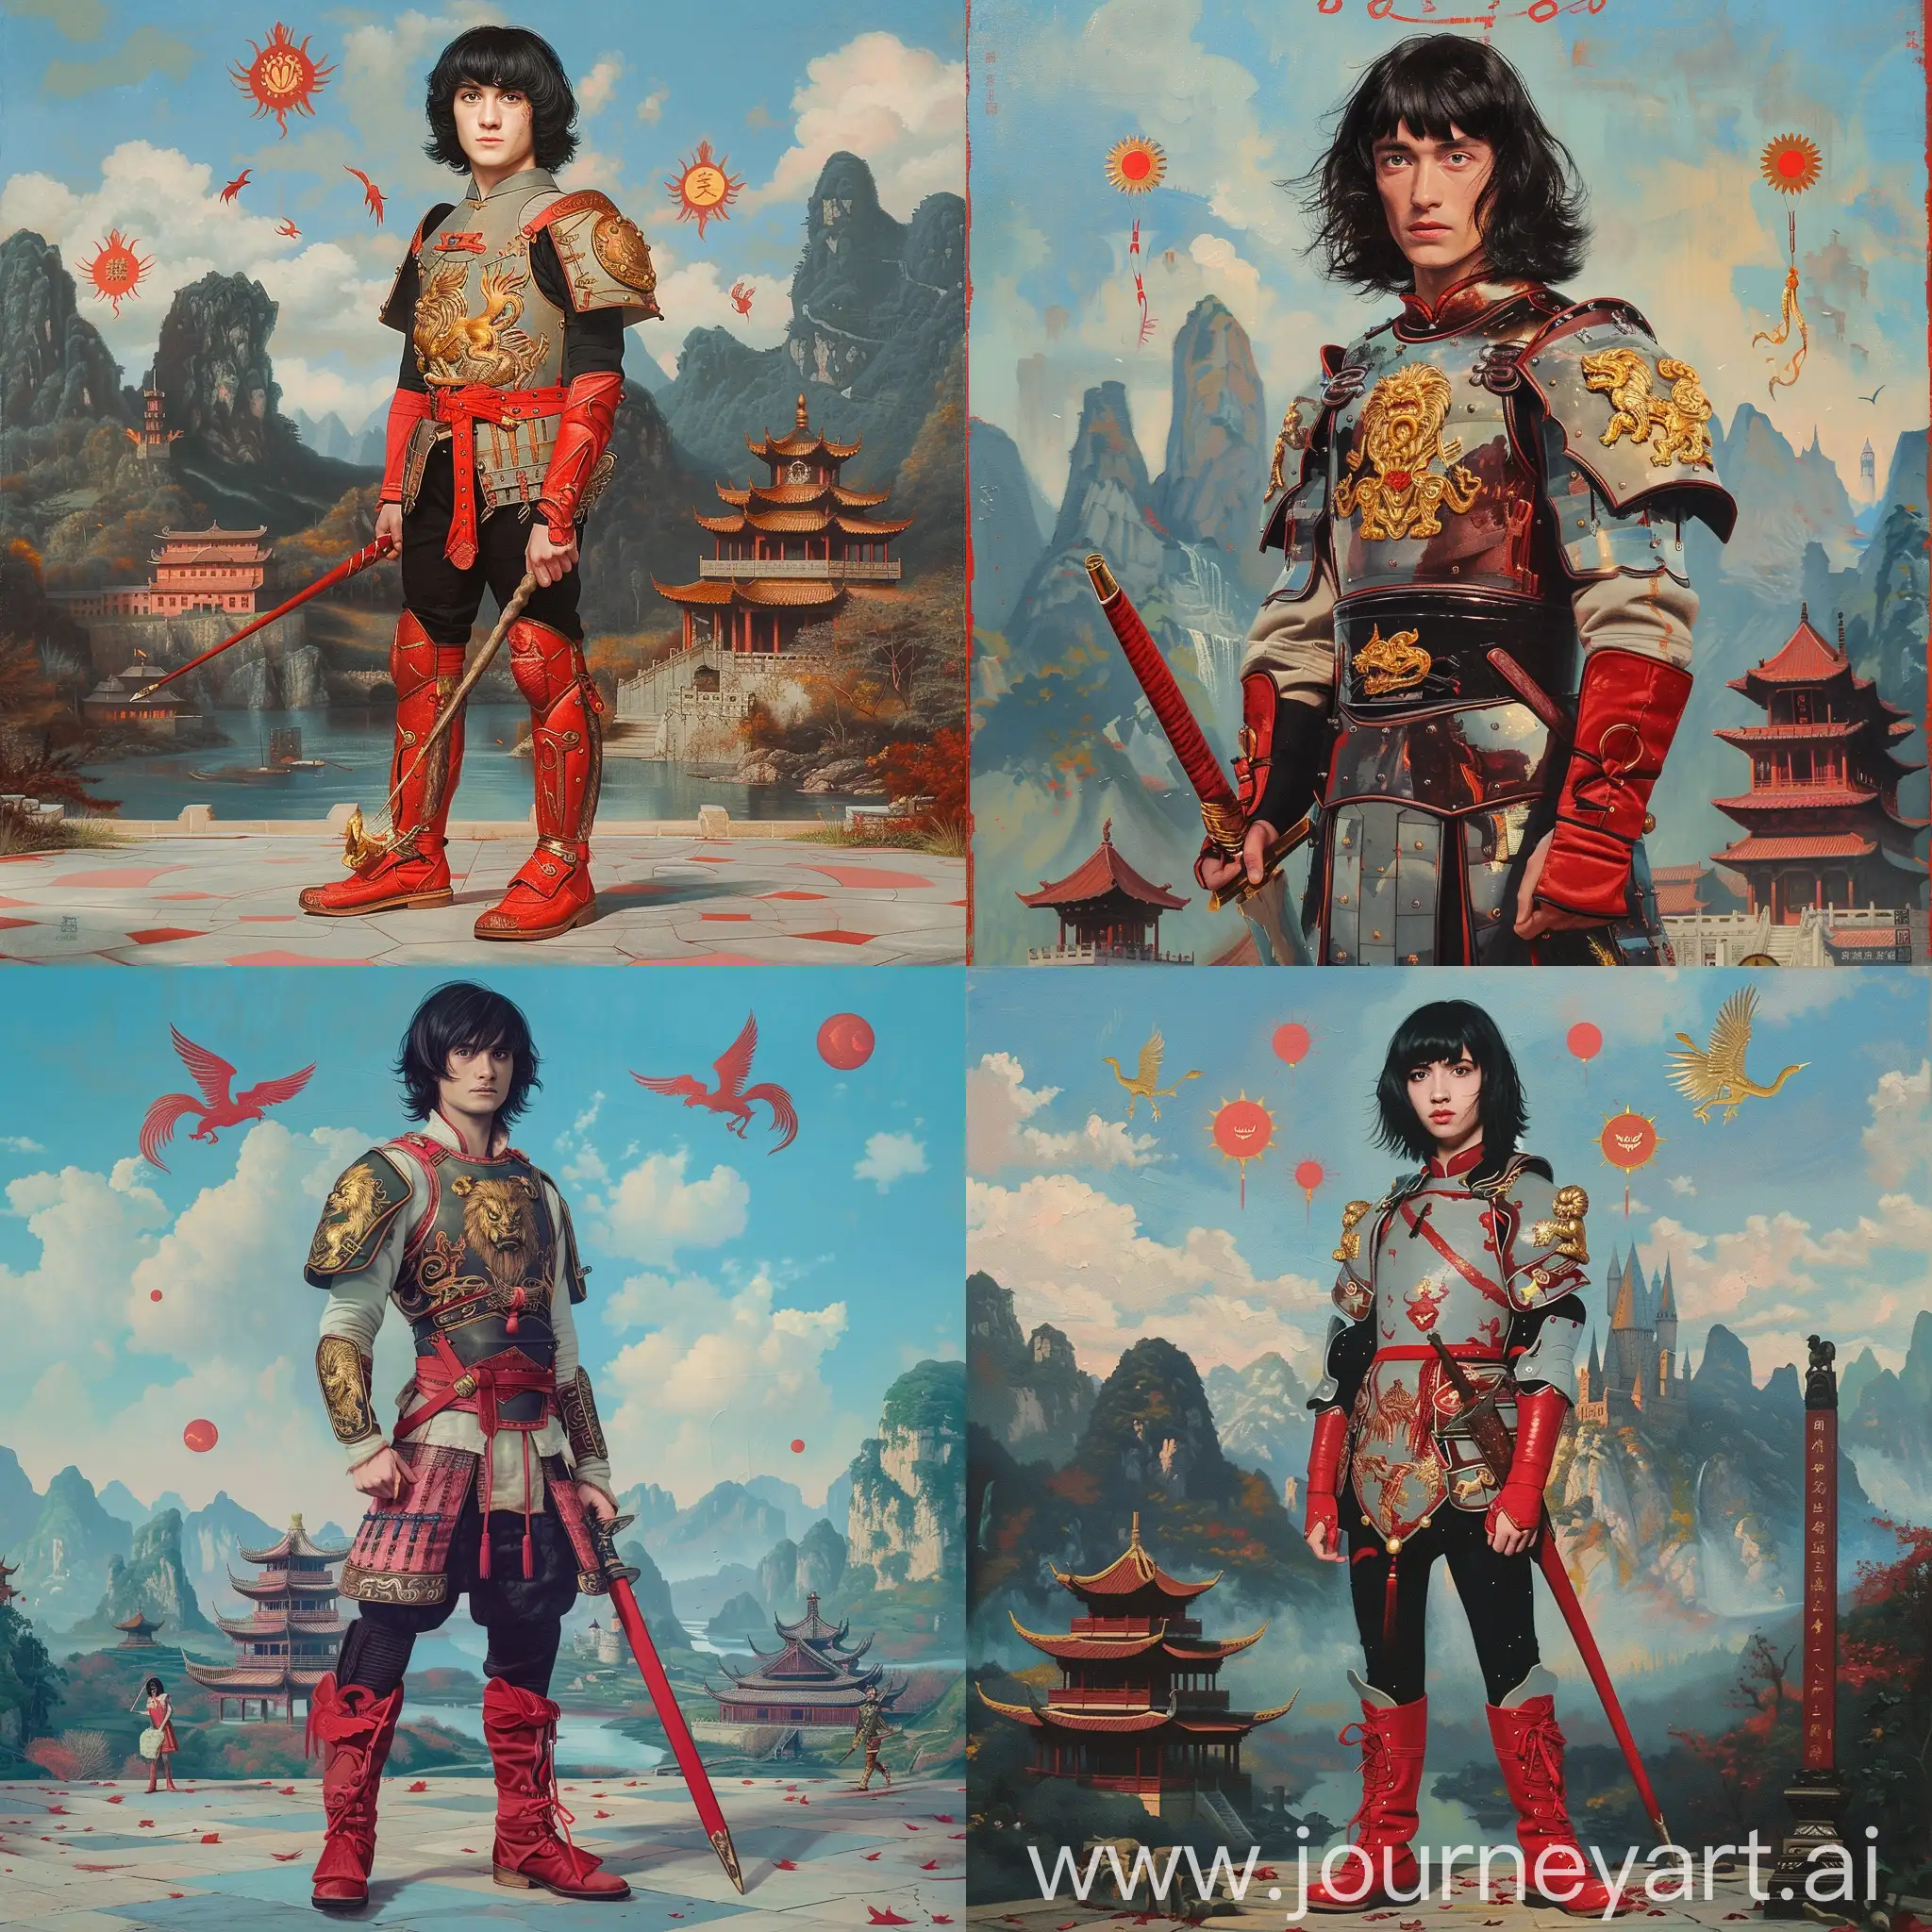 Historic painting style:

an handsome and lightly chubby Neville Londubat, with black hair with bangs, from the Harry Potter movie,

he looks like Matthew Lewis,

he wears light red and black color Chinese style medieval armor and red boots on feet,

golden gryffin lion emblems on her armor,
he holds a Chinese sword in right hand, 

Chinese Guilin mountains and temple as background, small phoenix and three small red suns in blue sky.